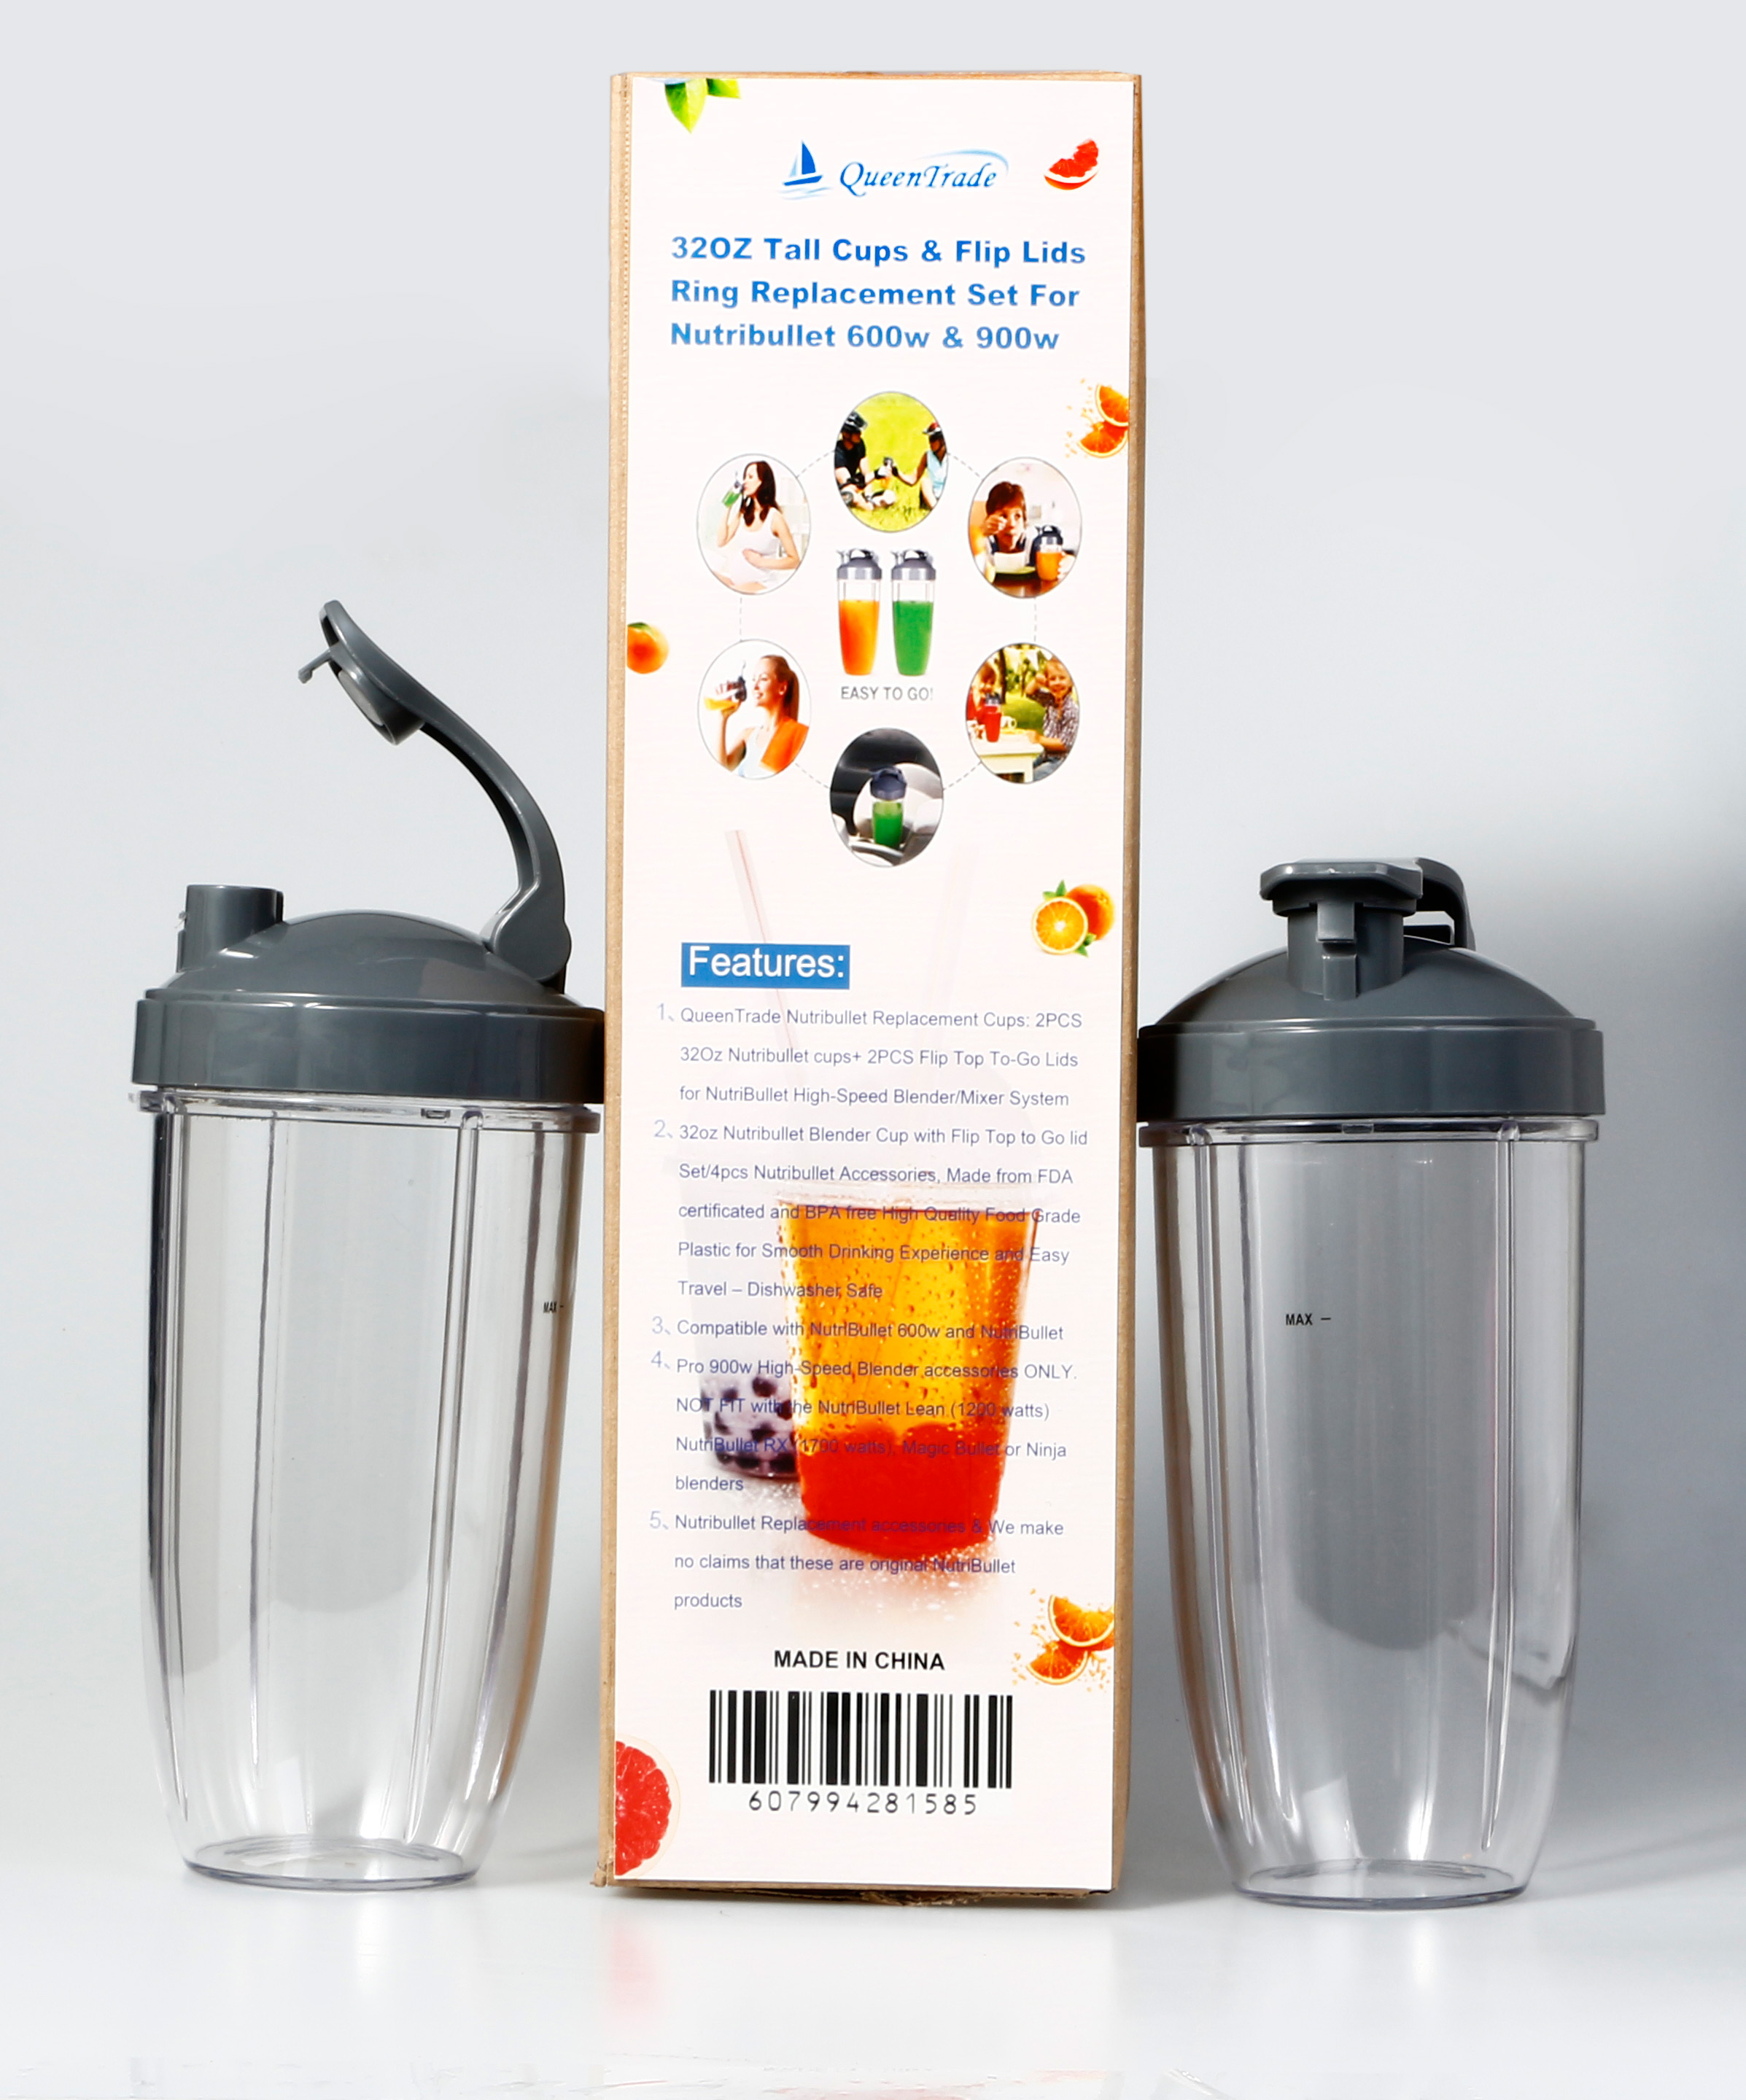 QueenTrade 32OZ Tall Cups & Flip Lids Ring Replacement Set For Nutribullet & 900w Mixer Replacement Accessories Parts